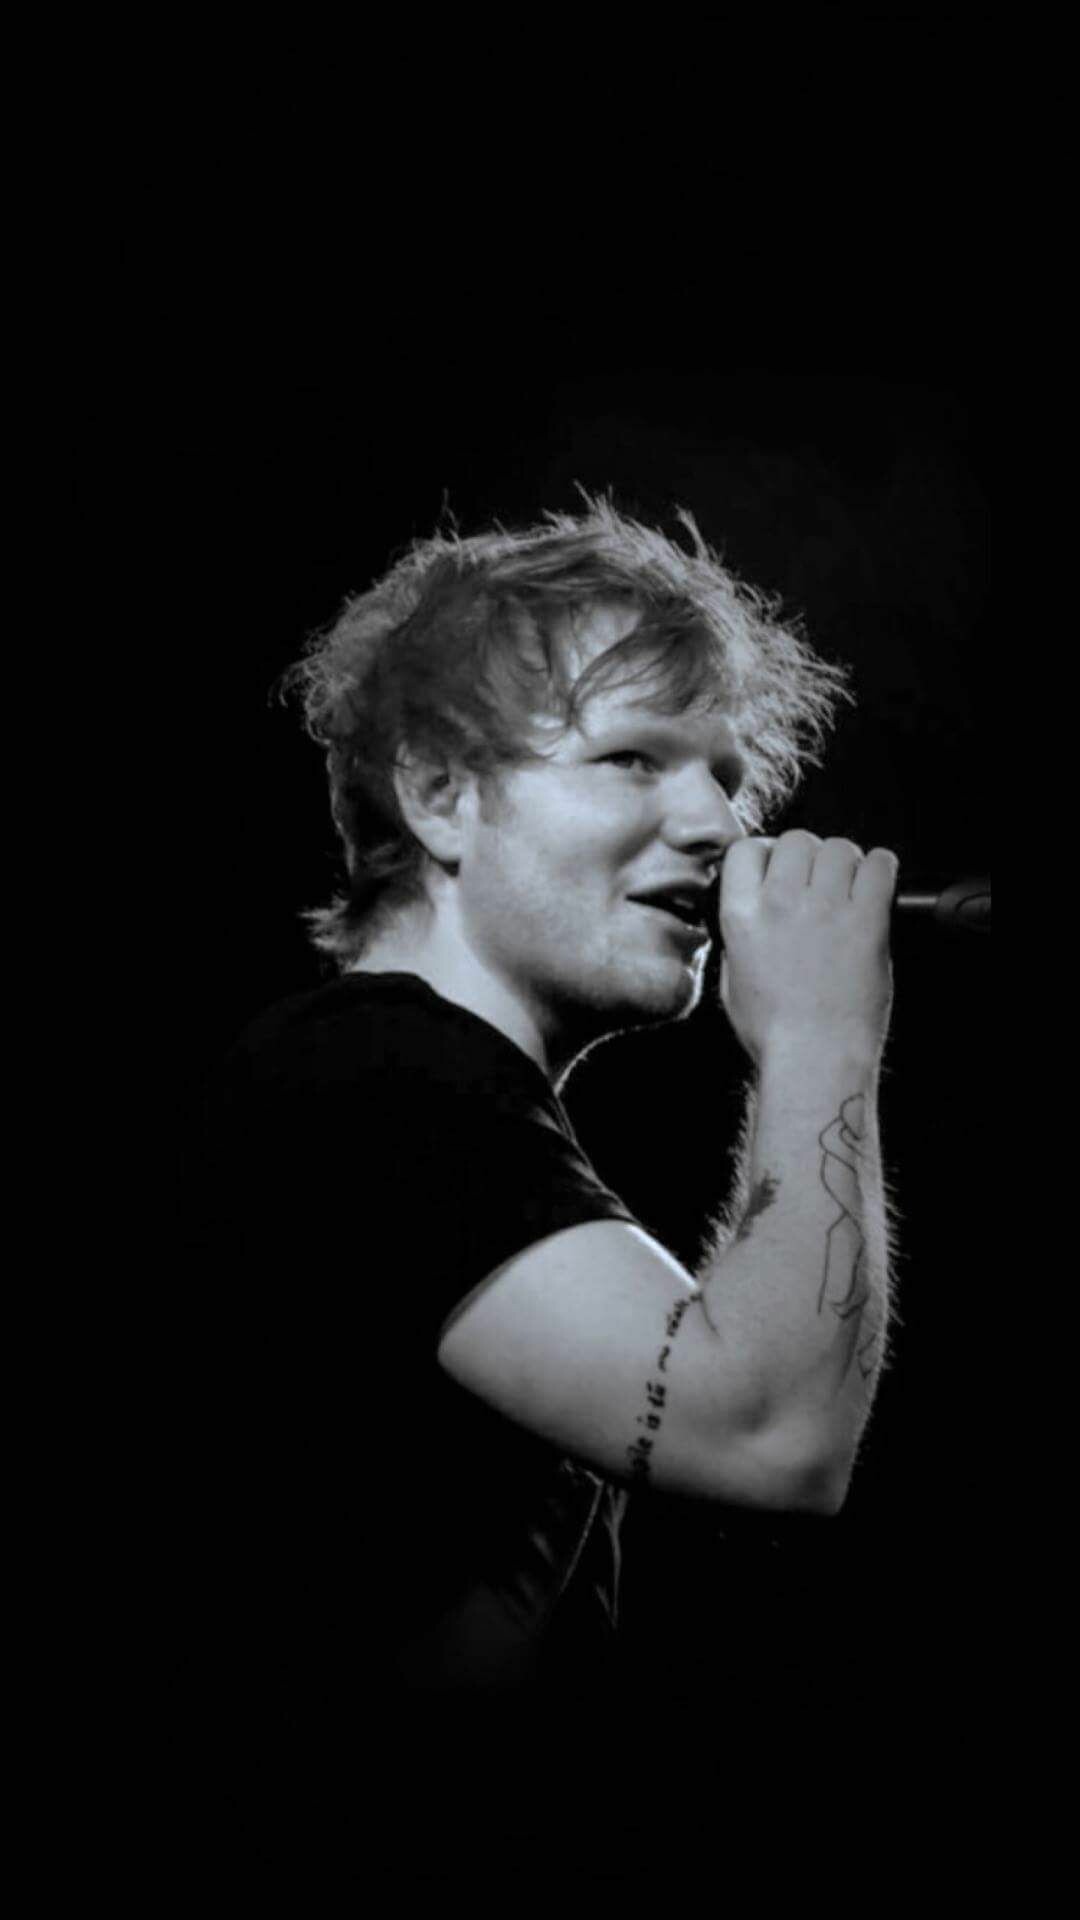 Ed Sheeran: Singer, Concert, "I See Fire" was released as a digital download on 5 November 2013. 1080x1920 Full HD Wallpaper.